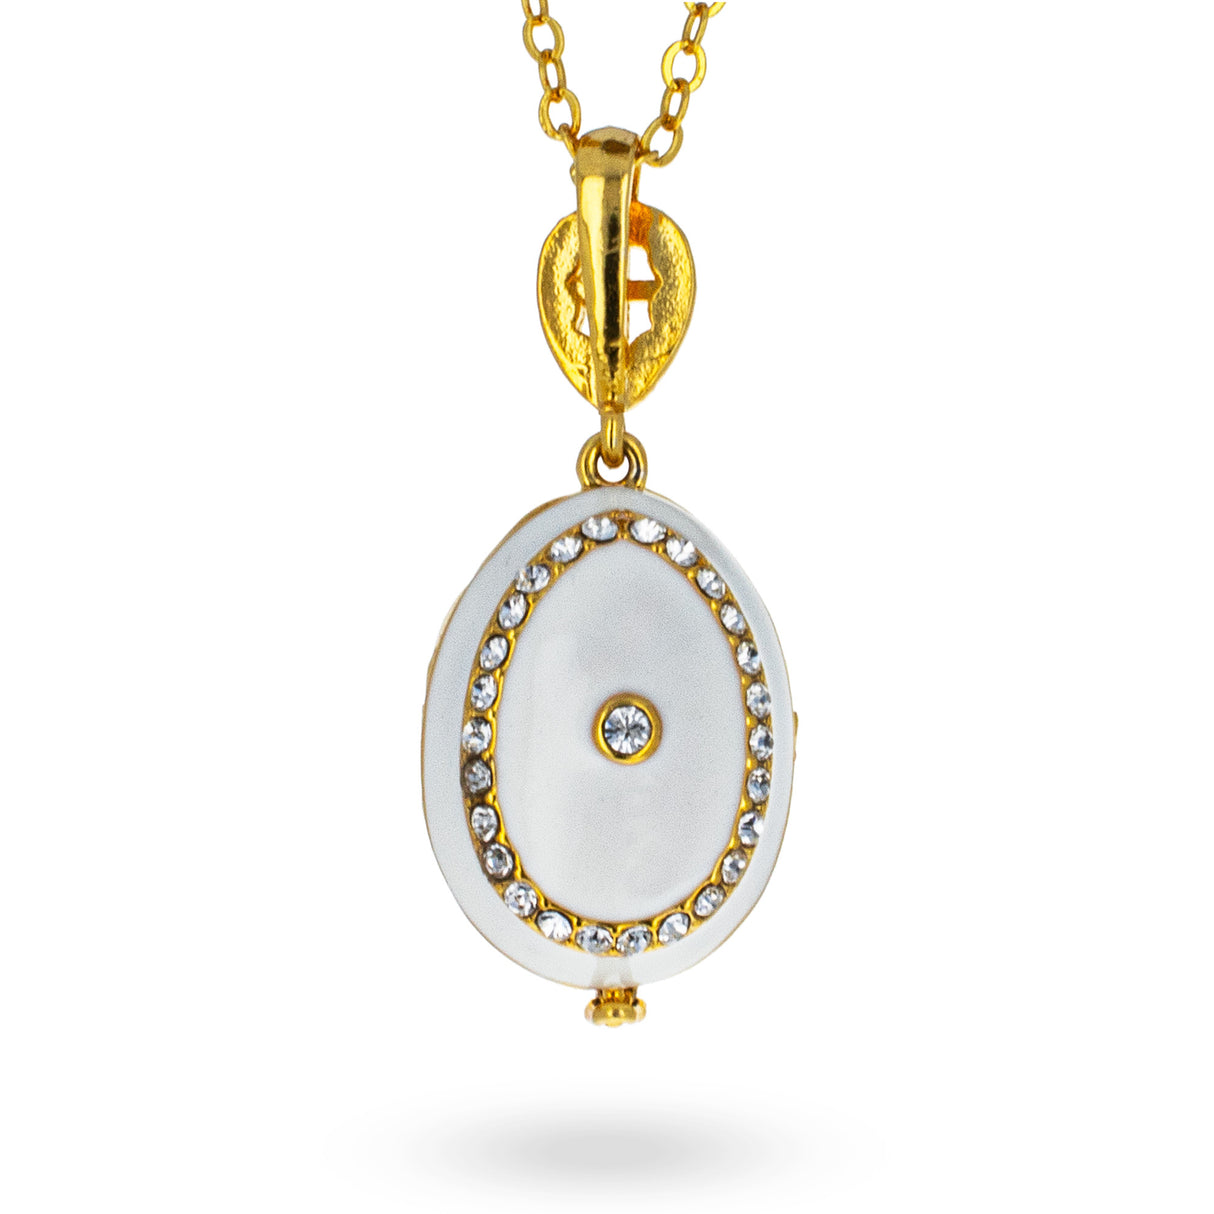 Shop White Brass 50 Crystals Triptych Icons Royal Egg Pendant Necklace. Buy White color Pewter Jewelry Necklaces Royal for Sale by Online Gift Shop BestPysanky